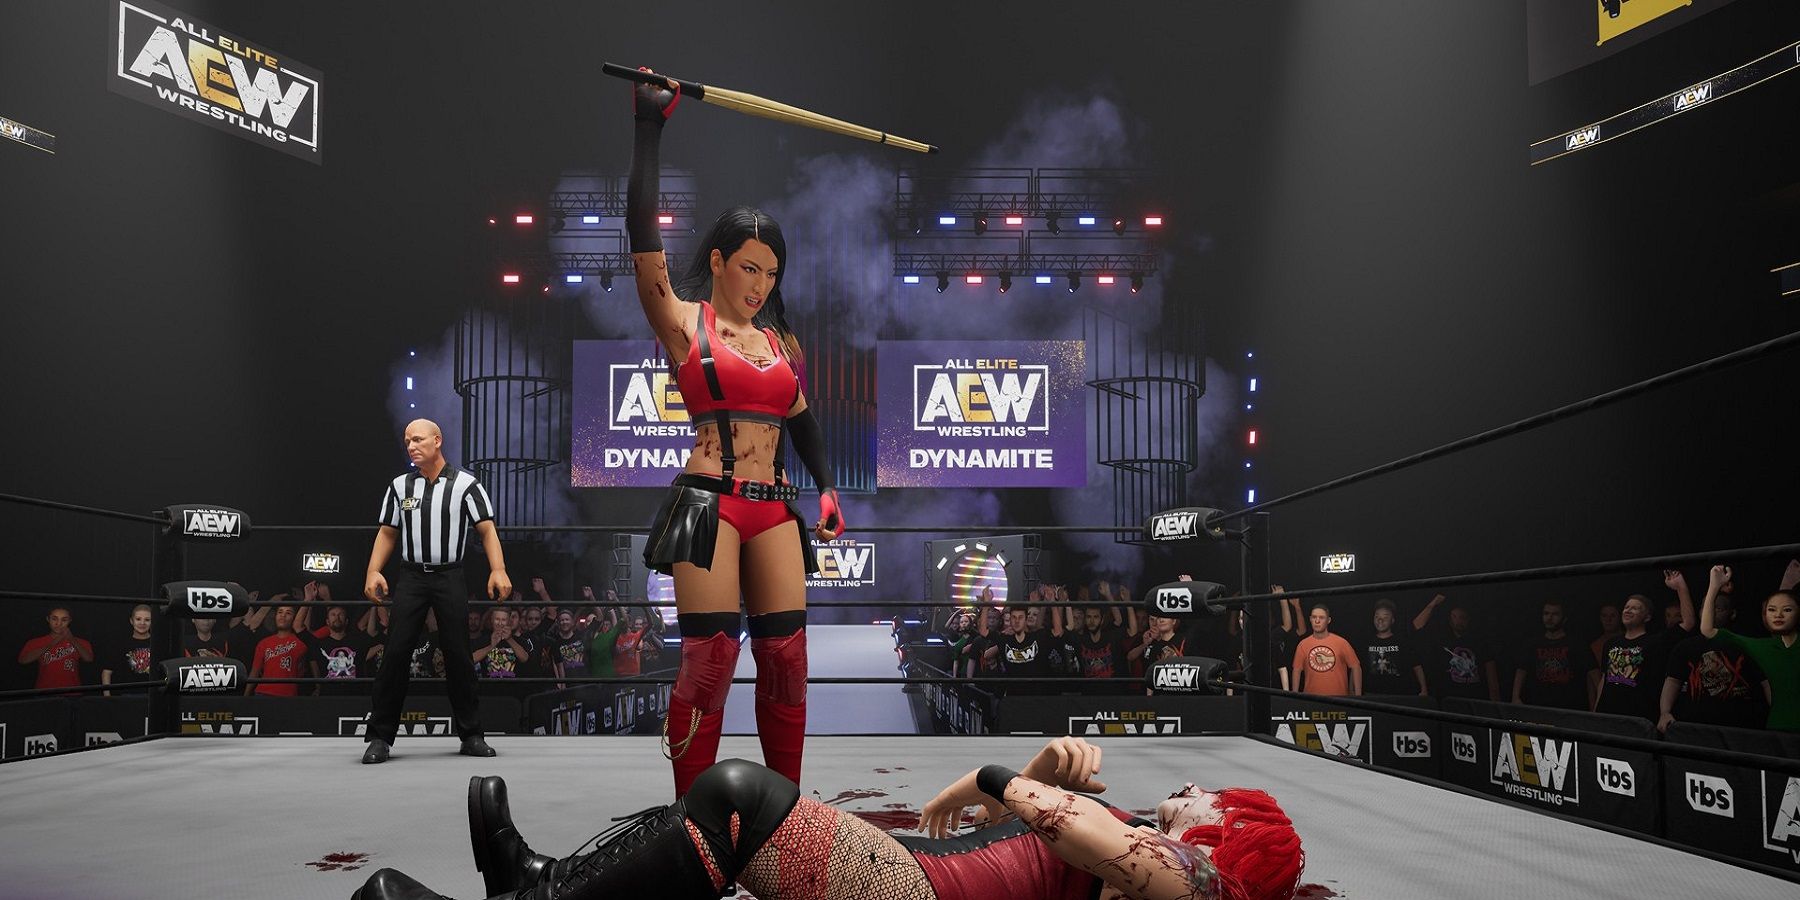 This is What AEW Forever Like Fight Looks Switch on